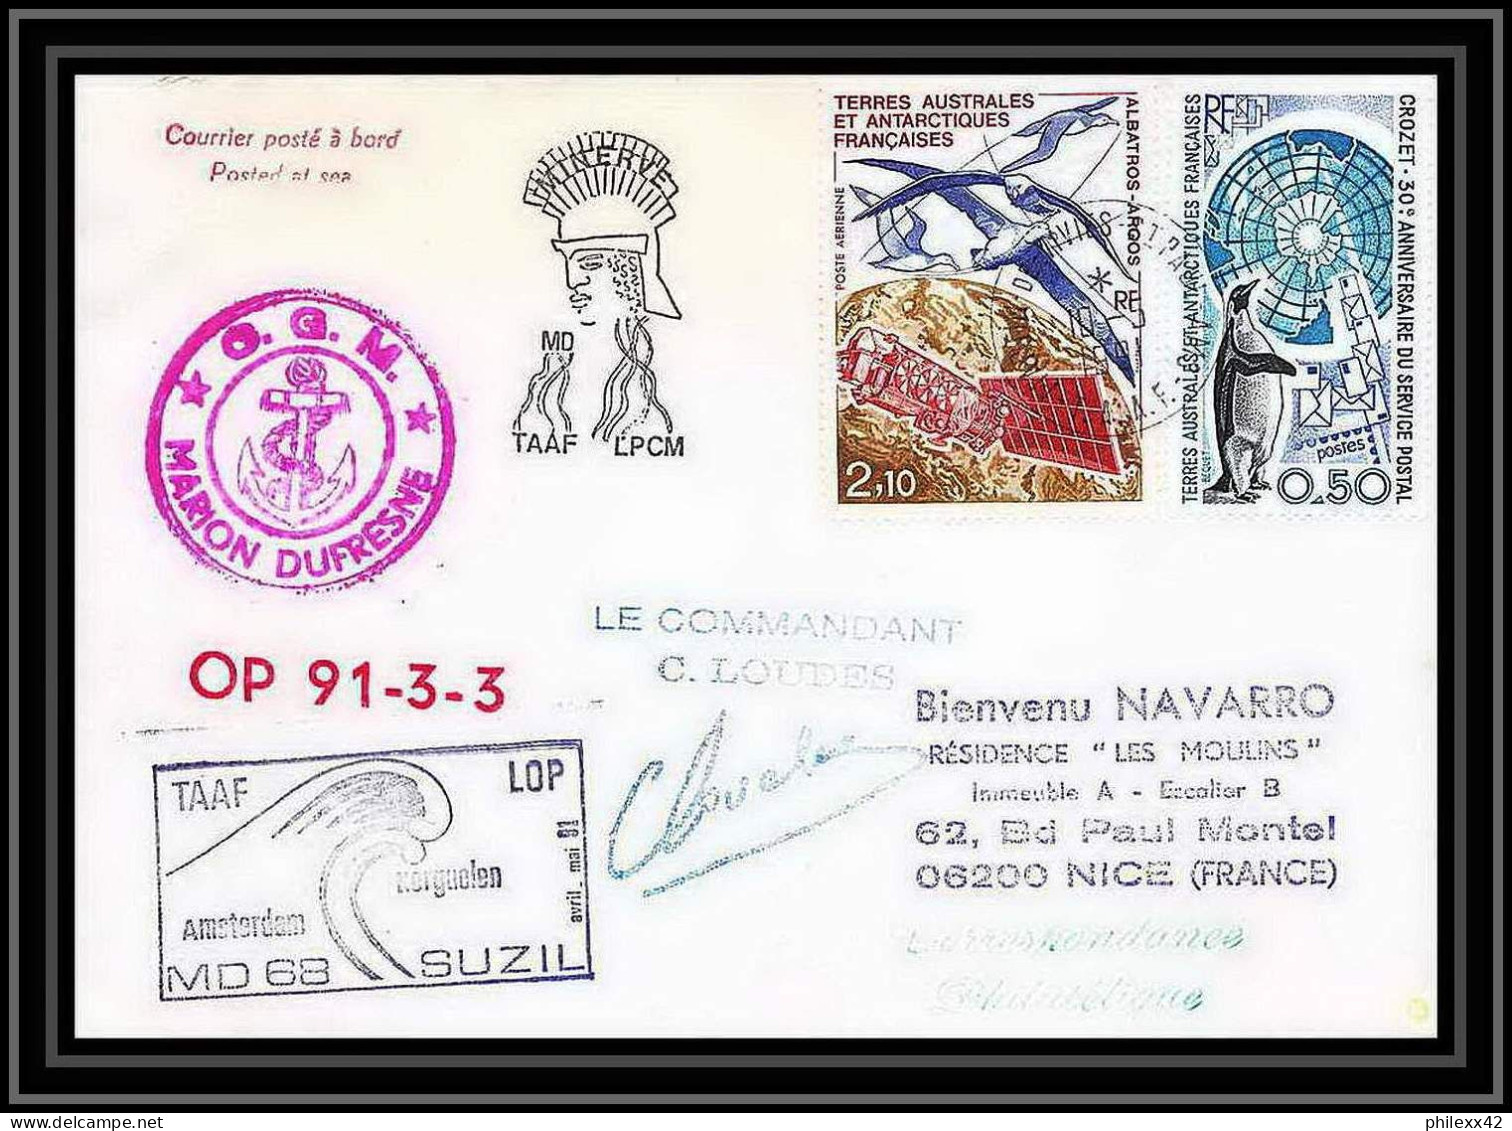 1764 Md 68 Op 91-3-3 Suzil Signé Signed Loudes Marion Dufresne 4/5/1991 TAAF Antarctic Terres Australes Lettre (cover) - Antarctic Expeditions